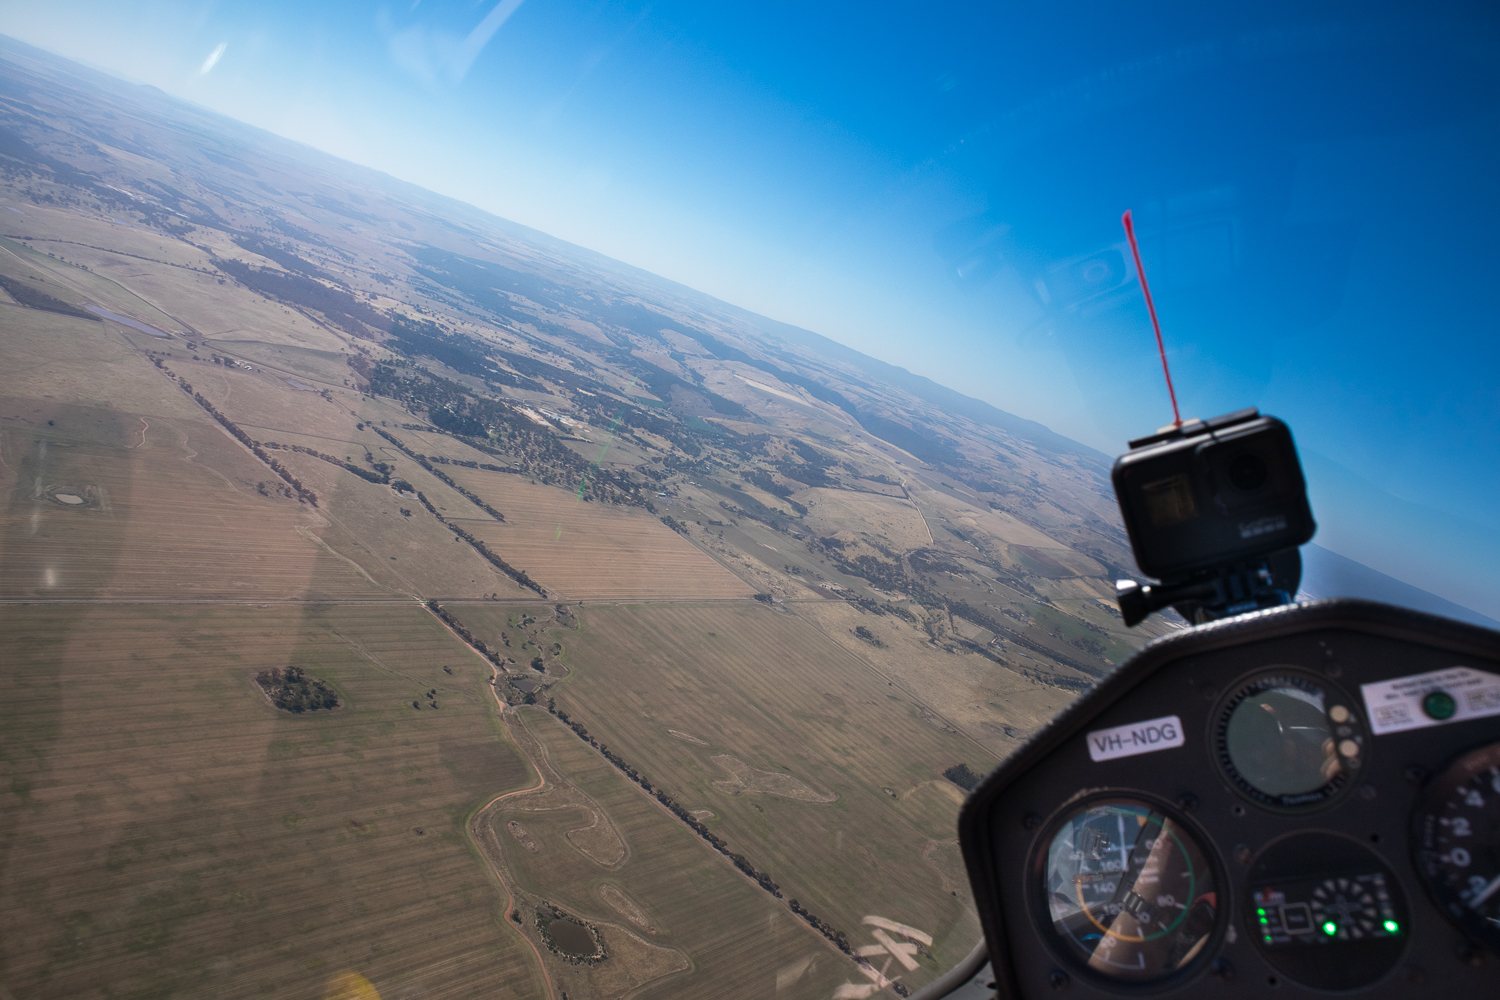 A photo shoot about gliding and flying in Australia